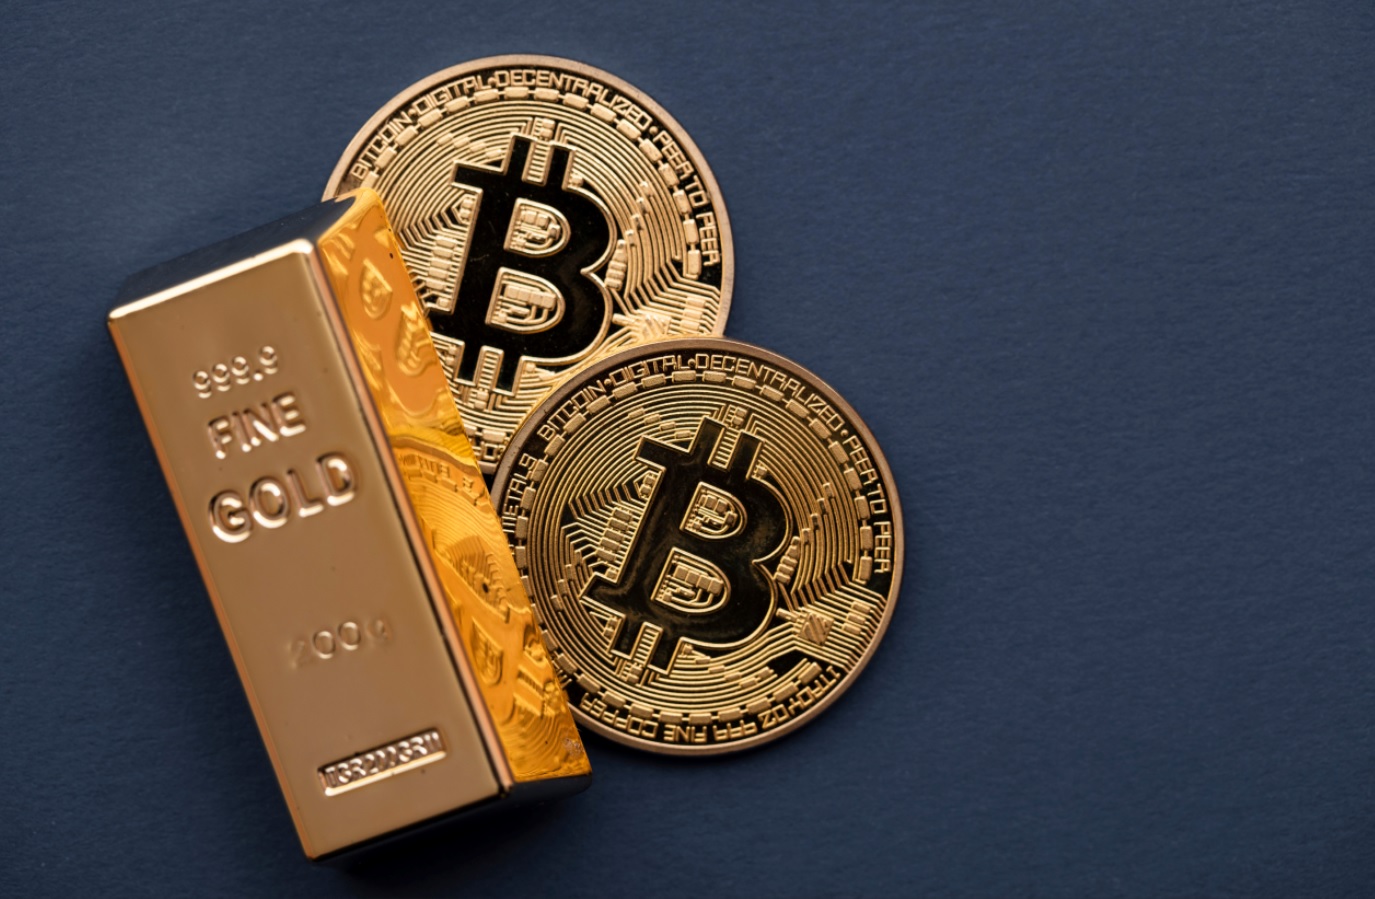 Here’s what experts think about VanEck’s recently proposed ETF focused on BTC and Gold mining firms